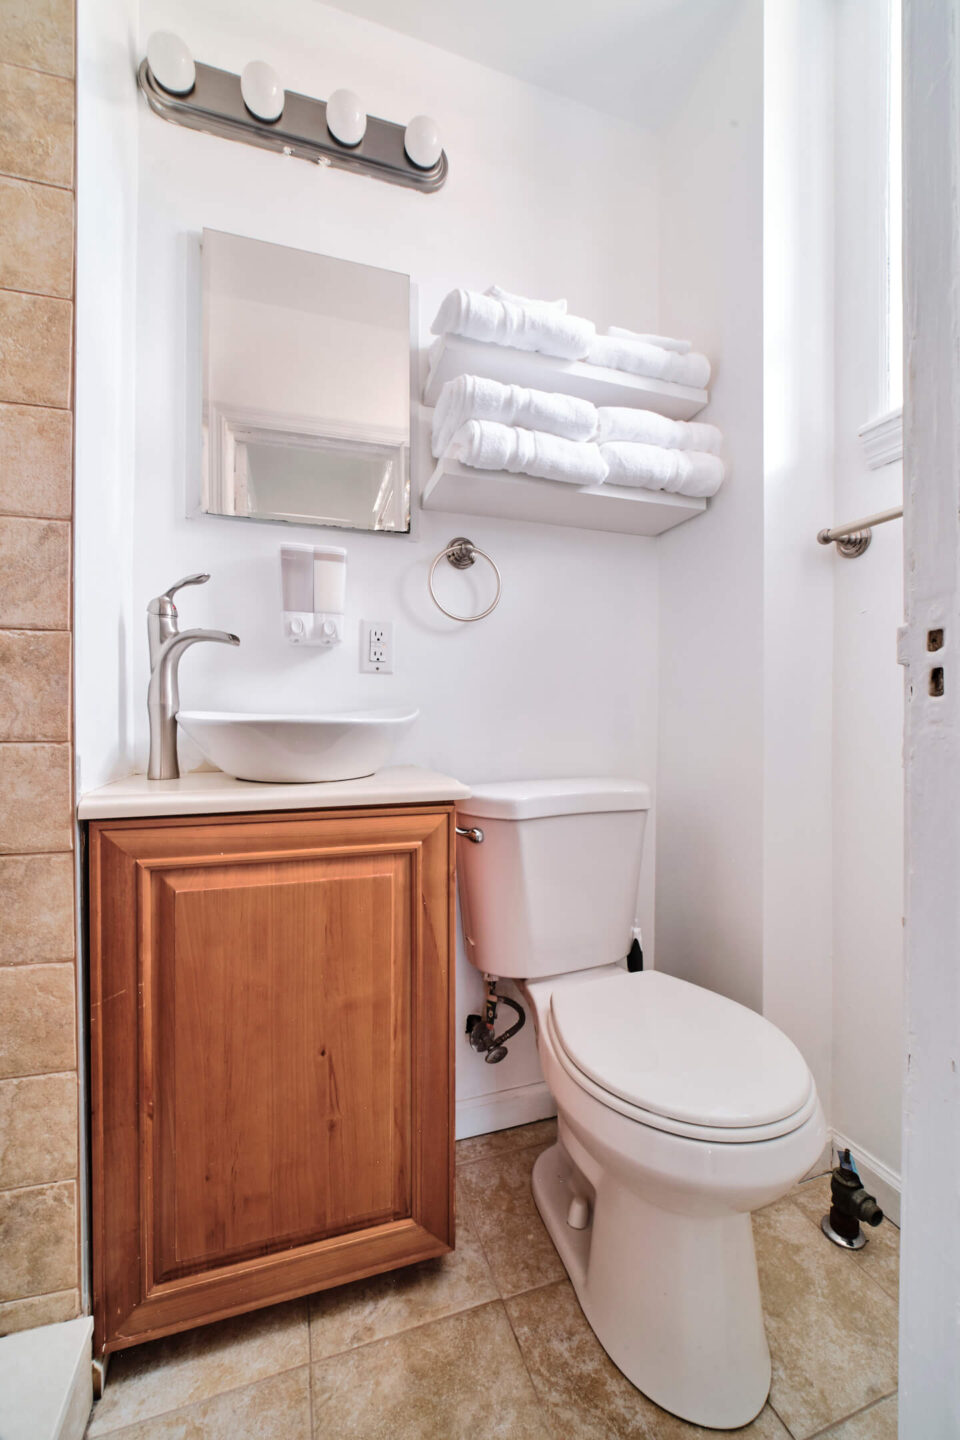 41-32 76th St, East Elmhurst, NY 11373 - Apt 4 - Real Estate Photography - AirBnB Listing